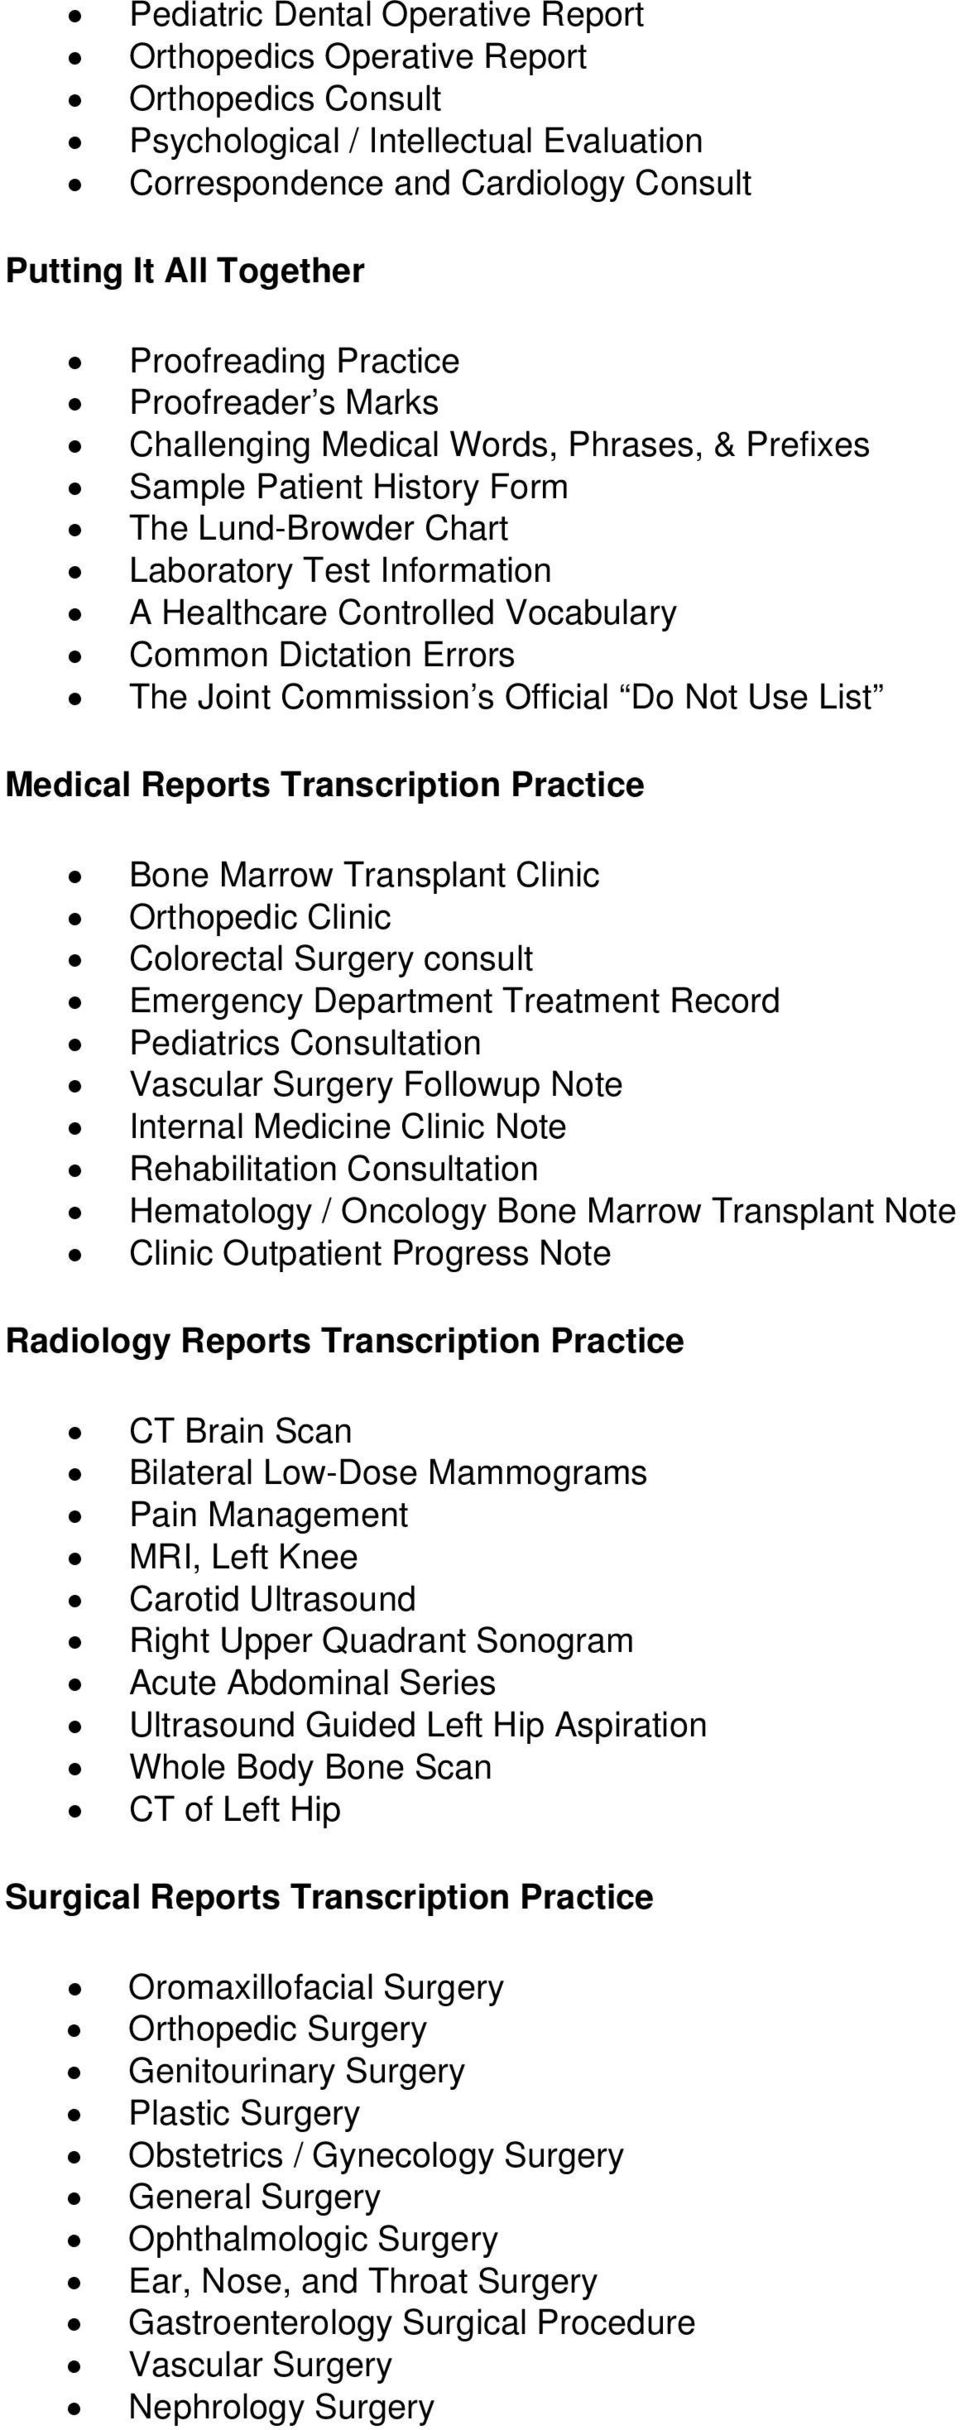 Dictation Errors The Joint Commission s Official Do Not Use List Medical Reports Transcription Practice Bone Marrow Transplant Clinic Orthopedic Clinic Colorectal Surgery consult Emergency Department